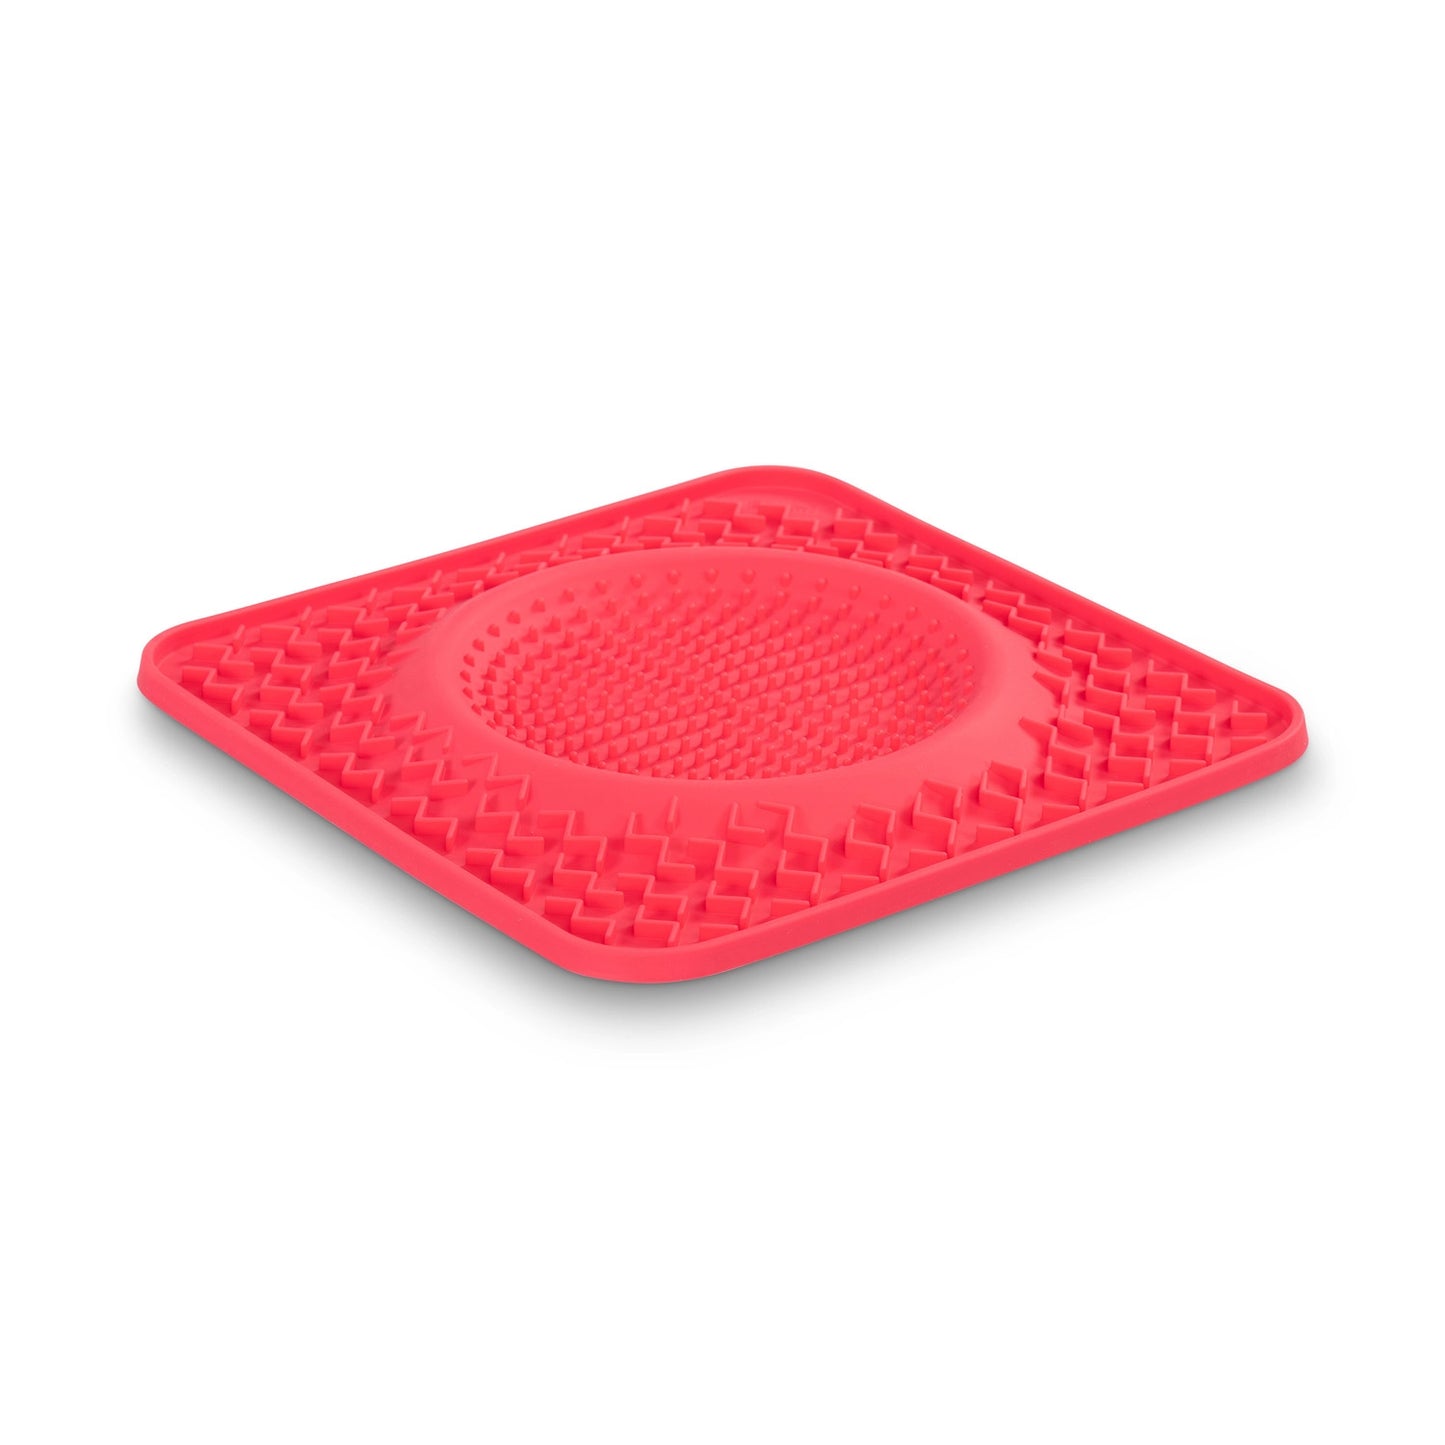 Messy Mutts Silicone Therapeutic Licking Bowl Mat